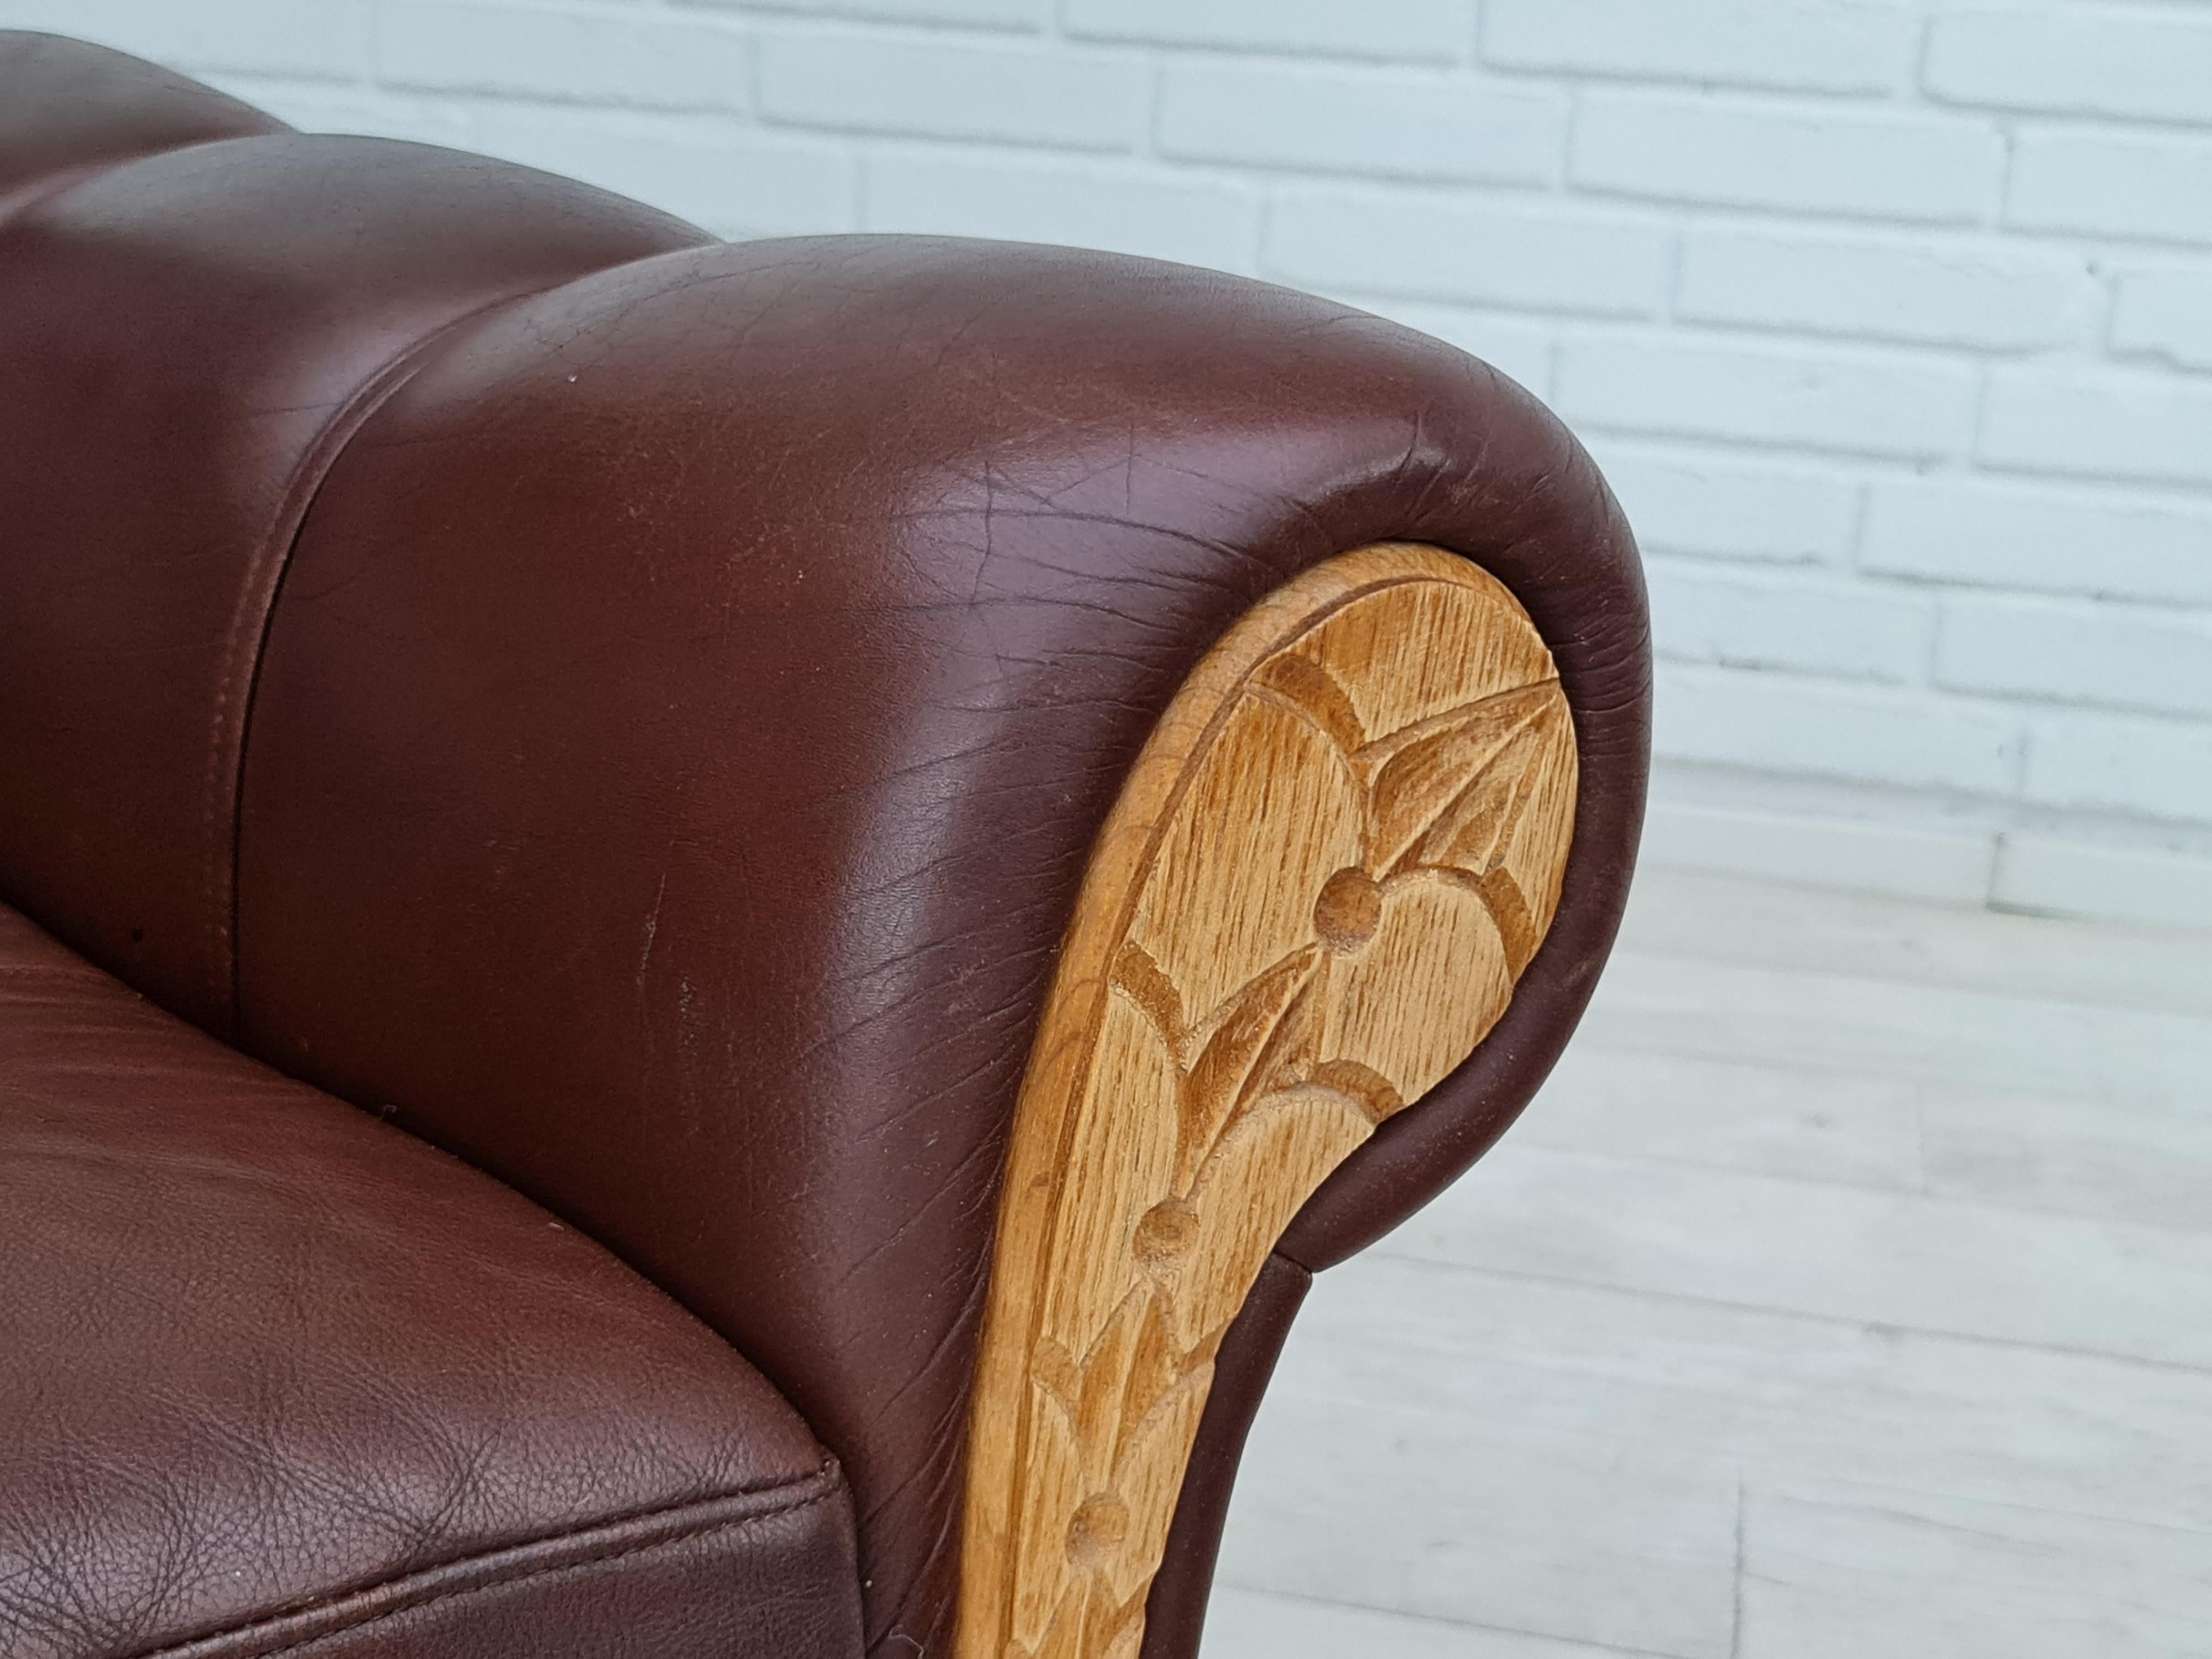 Danish desiged vintage lounge chair. Made in about 1970 by Danish furniture manufacturer. Original upholstery in good condition, no stains, no smells.  Normal signs of wear, patina. Brown leather, loose seat cushion. Oak wood leg construction. Front